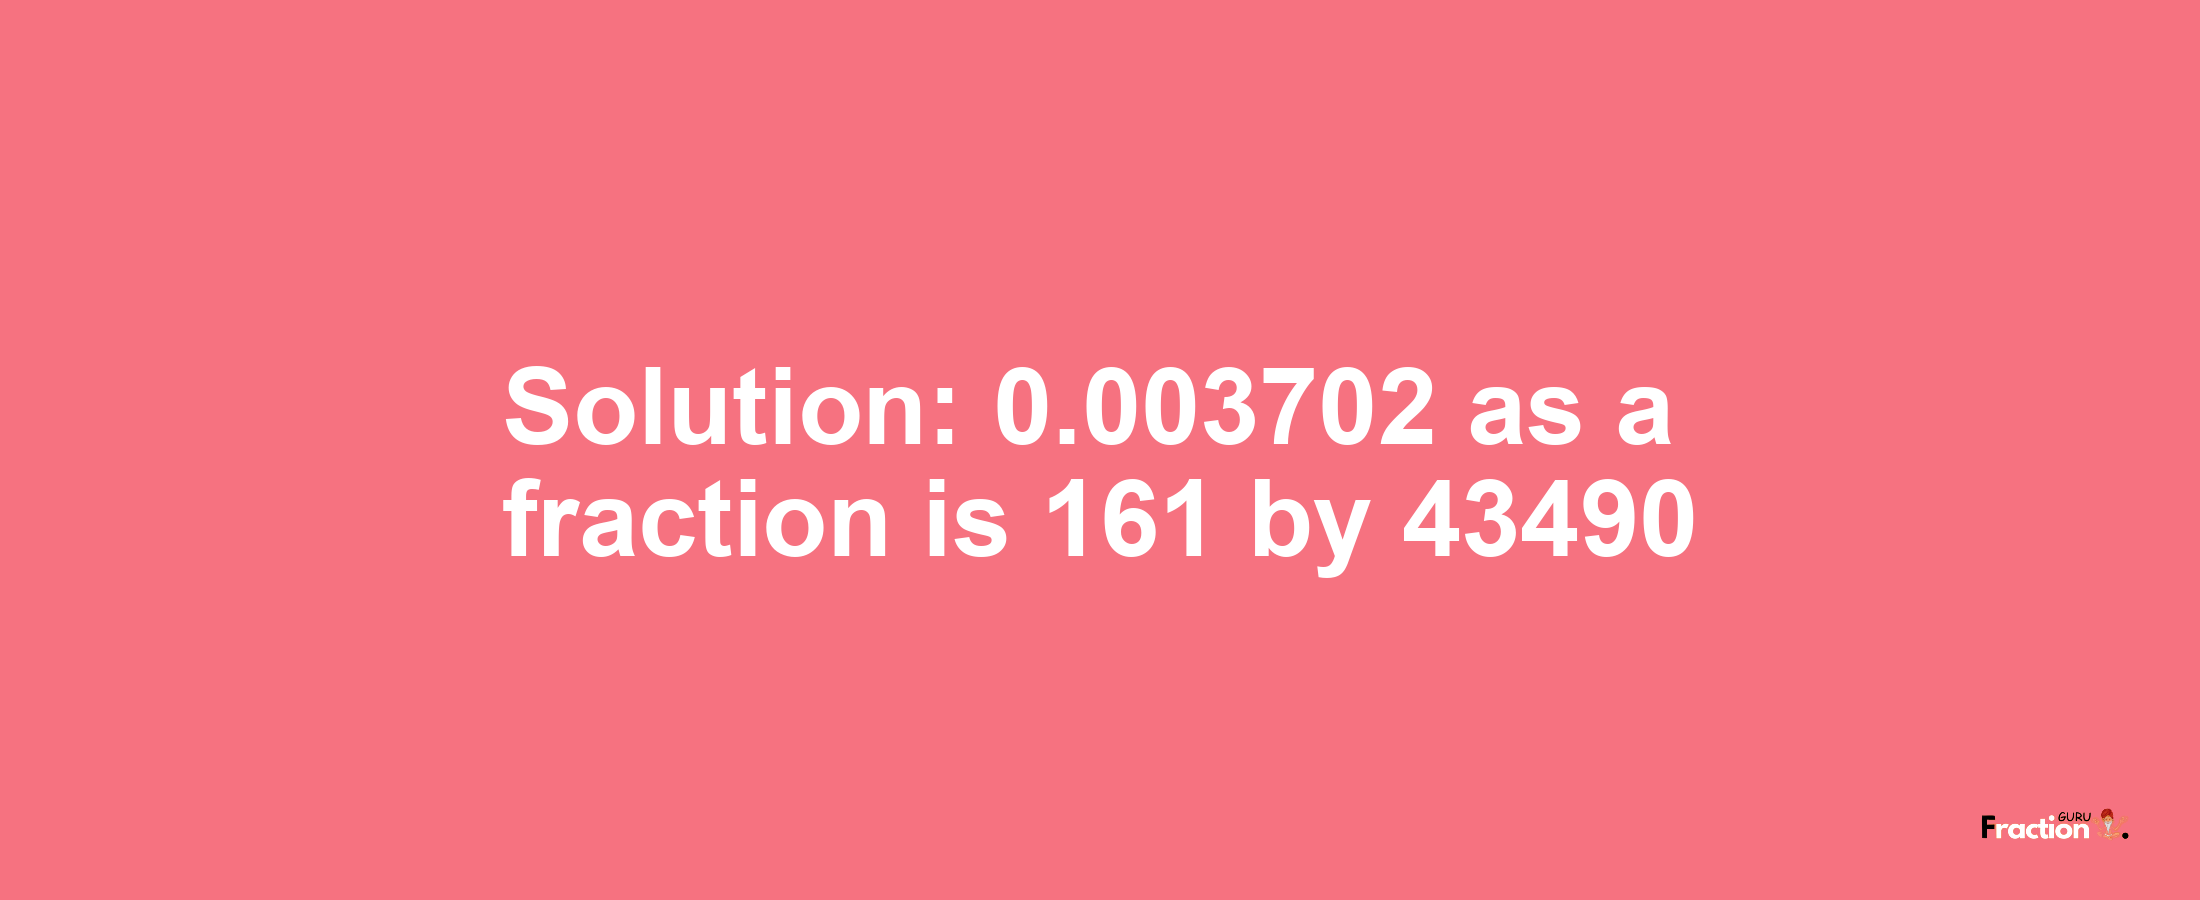 Solution:0.003702 as a fraction is 161/43490